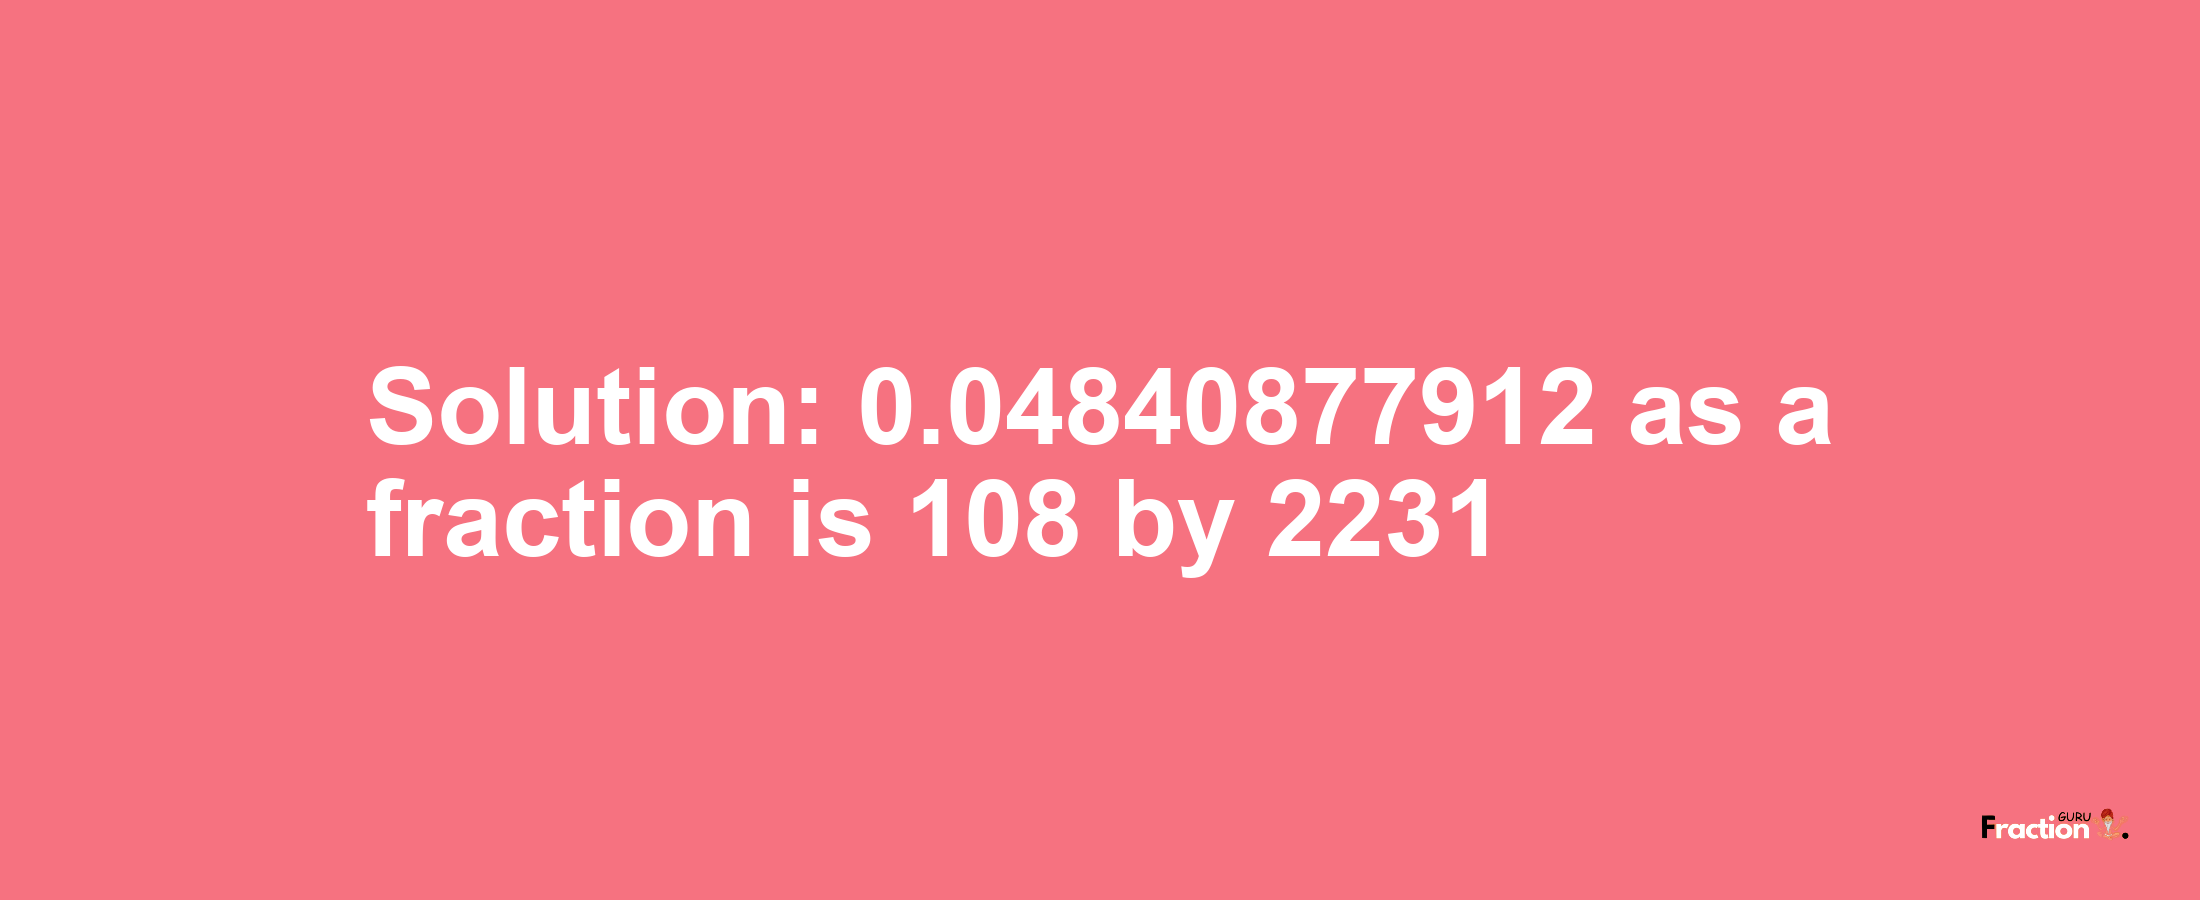 Solution:0.04840877912 as a fraction is 108/2231